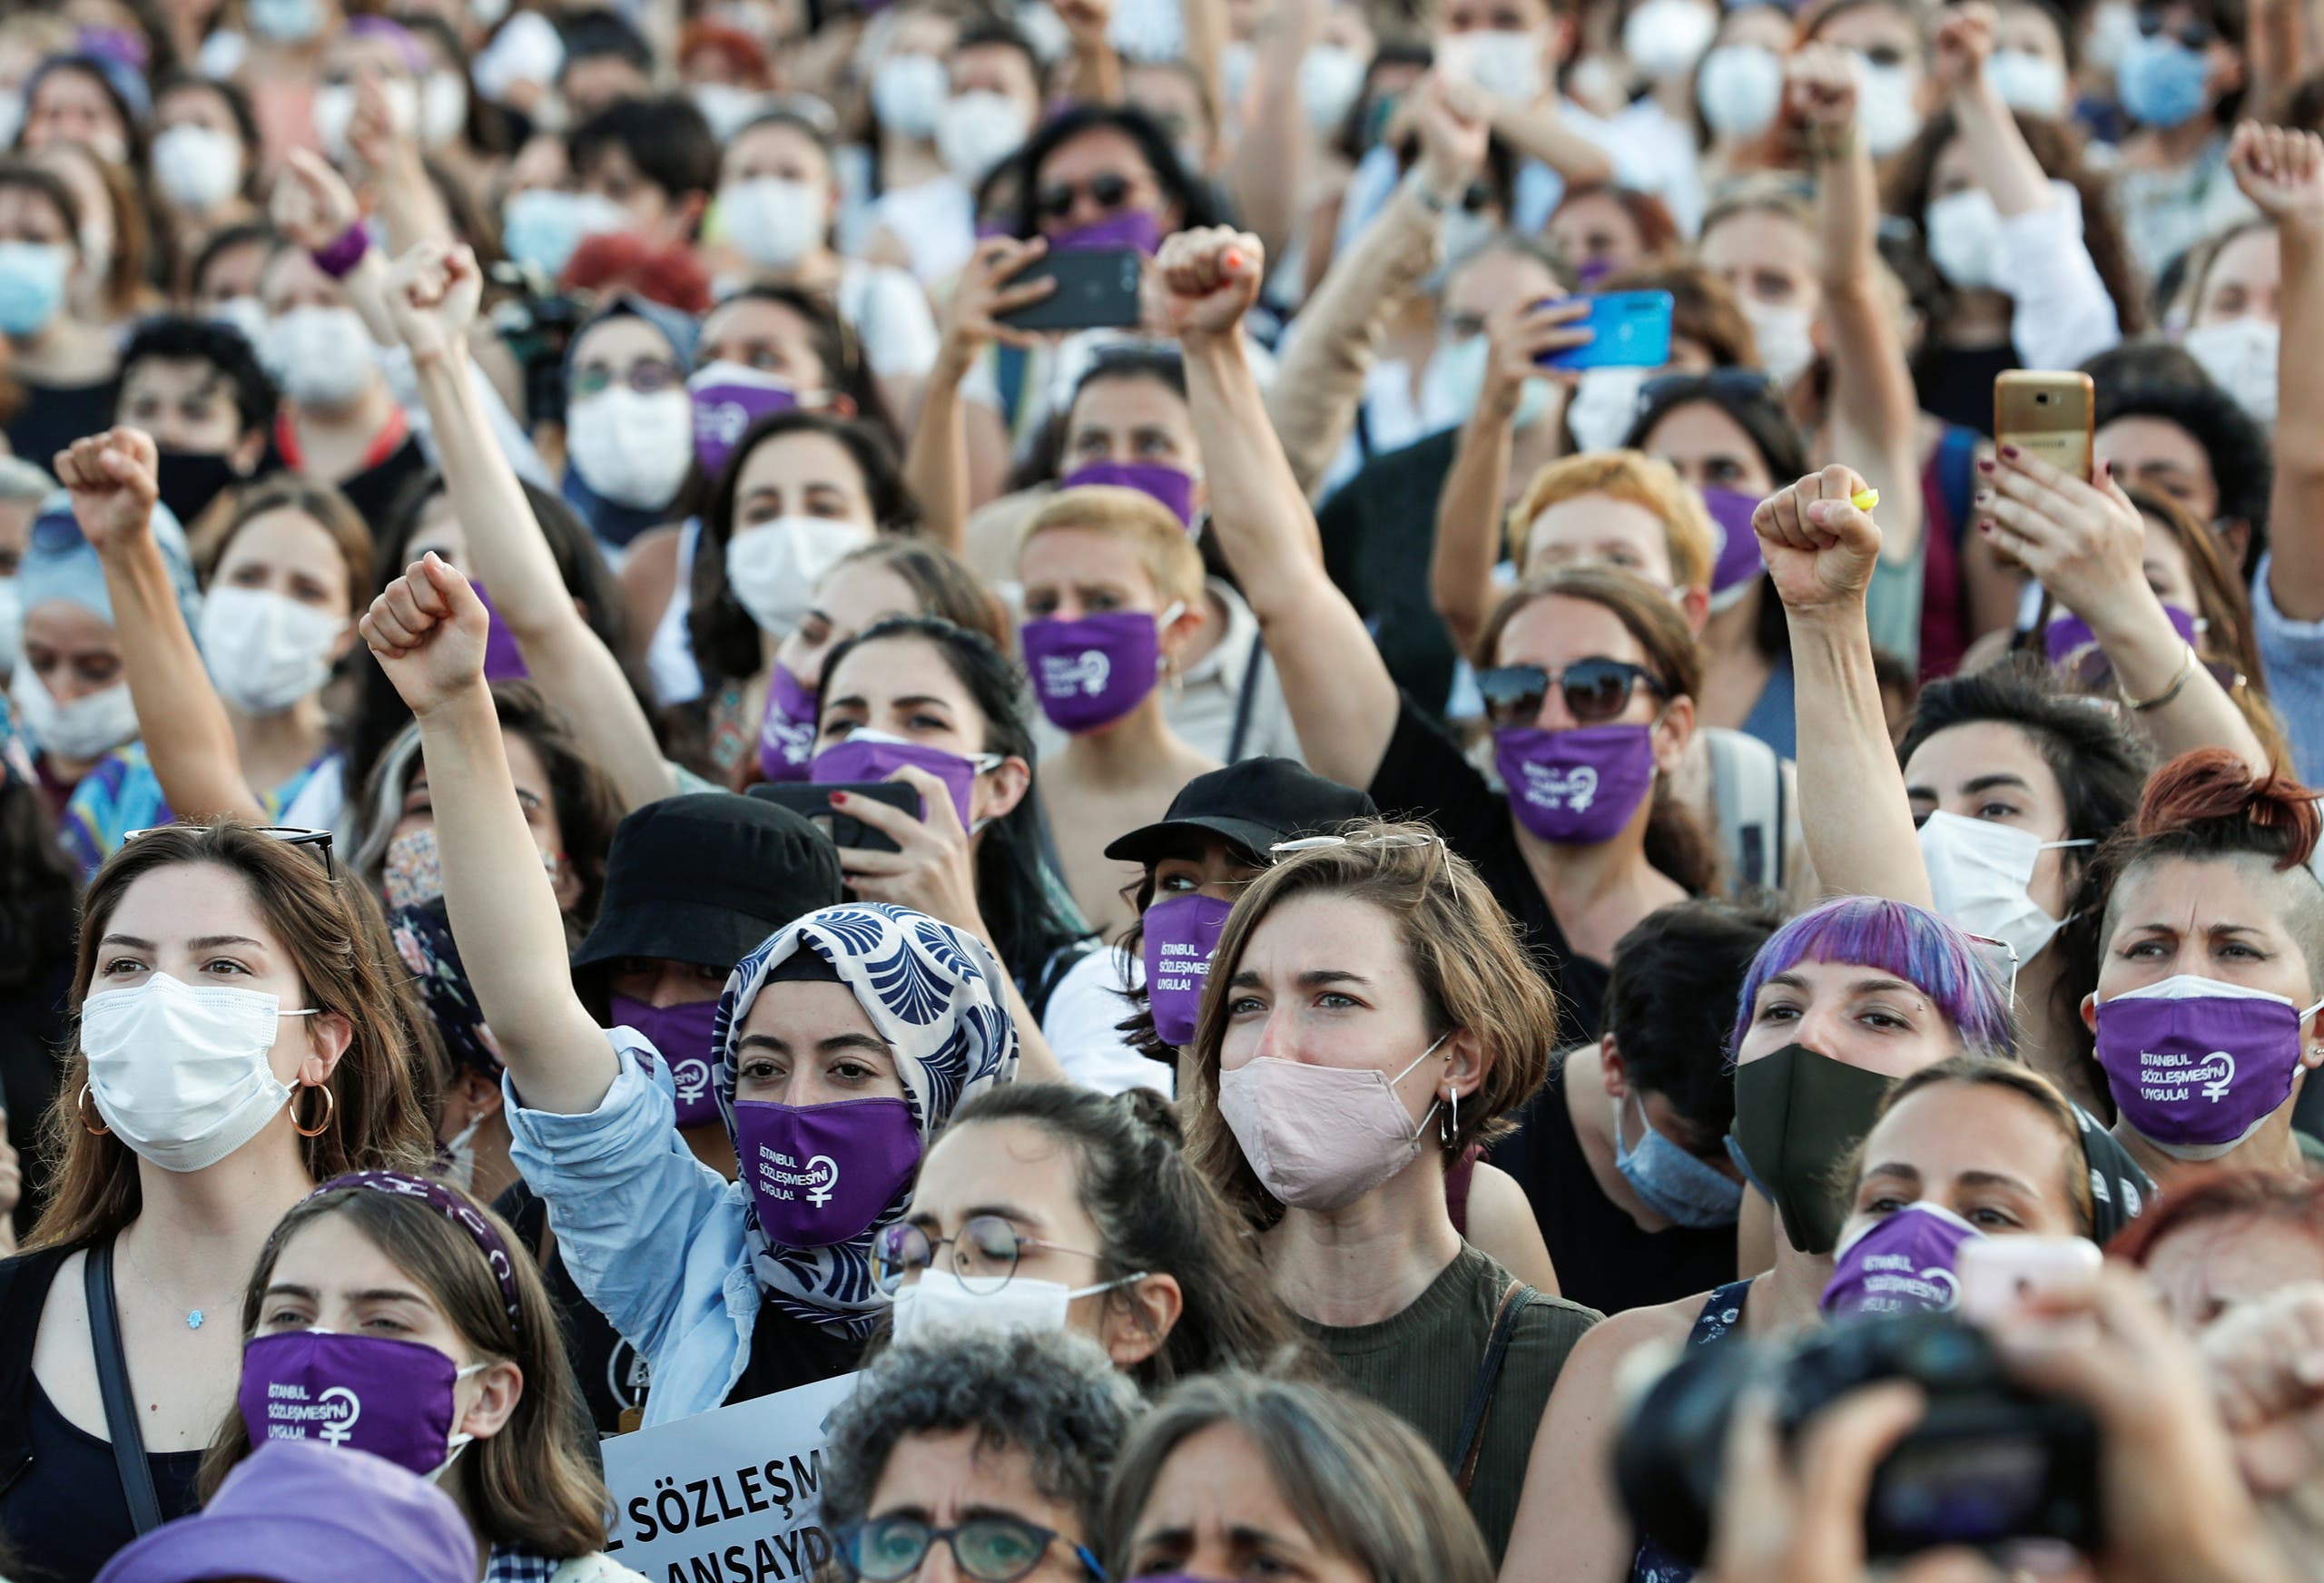 Women shout slogans during a protest against femicide and domestic violence, in Istanbul, Turkey August 5, 2020. (File photo: Reuters)